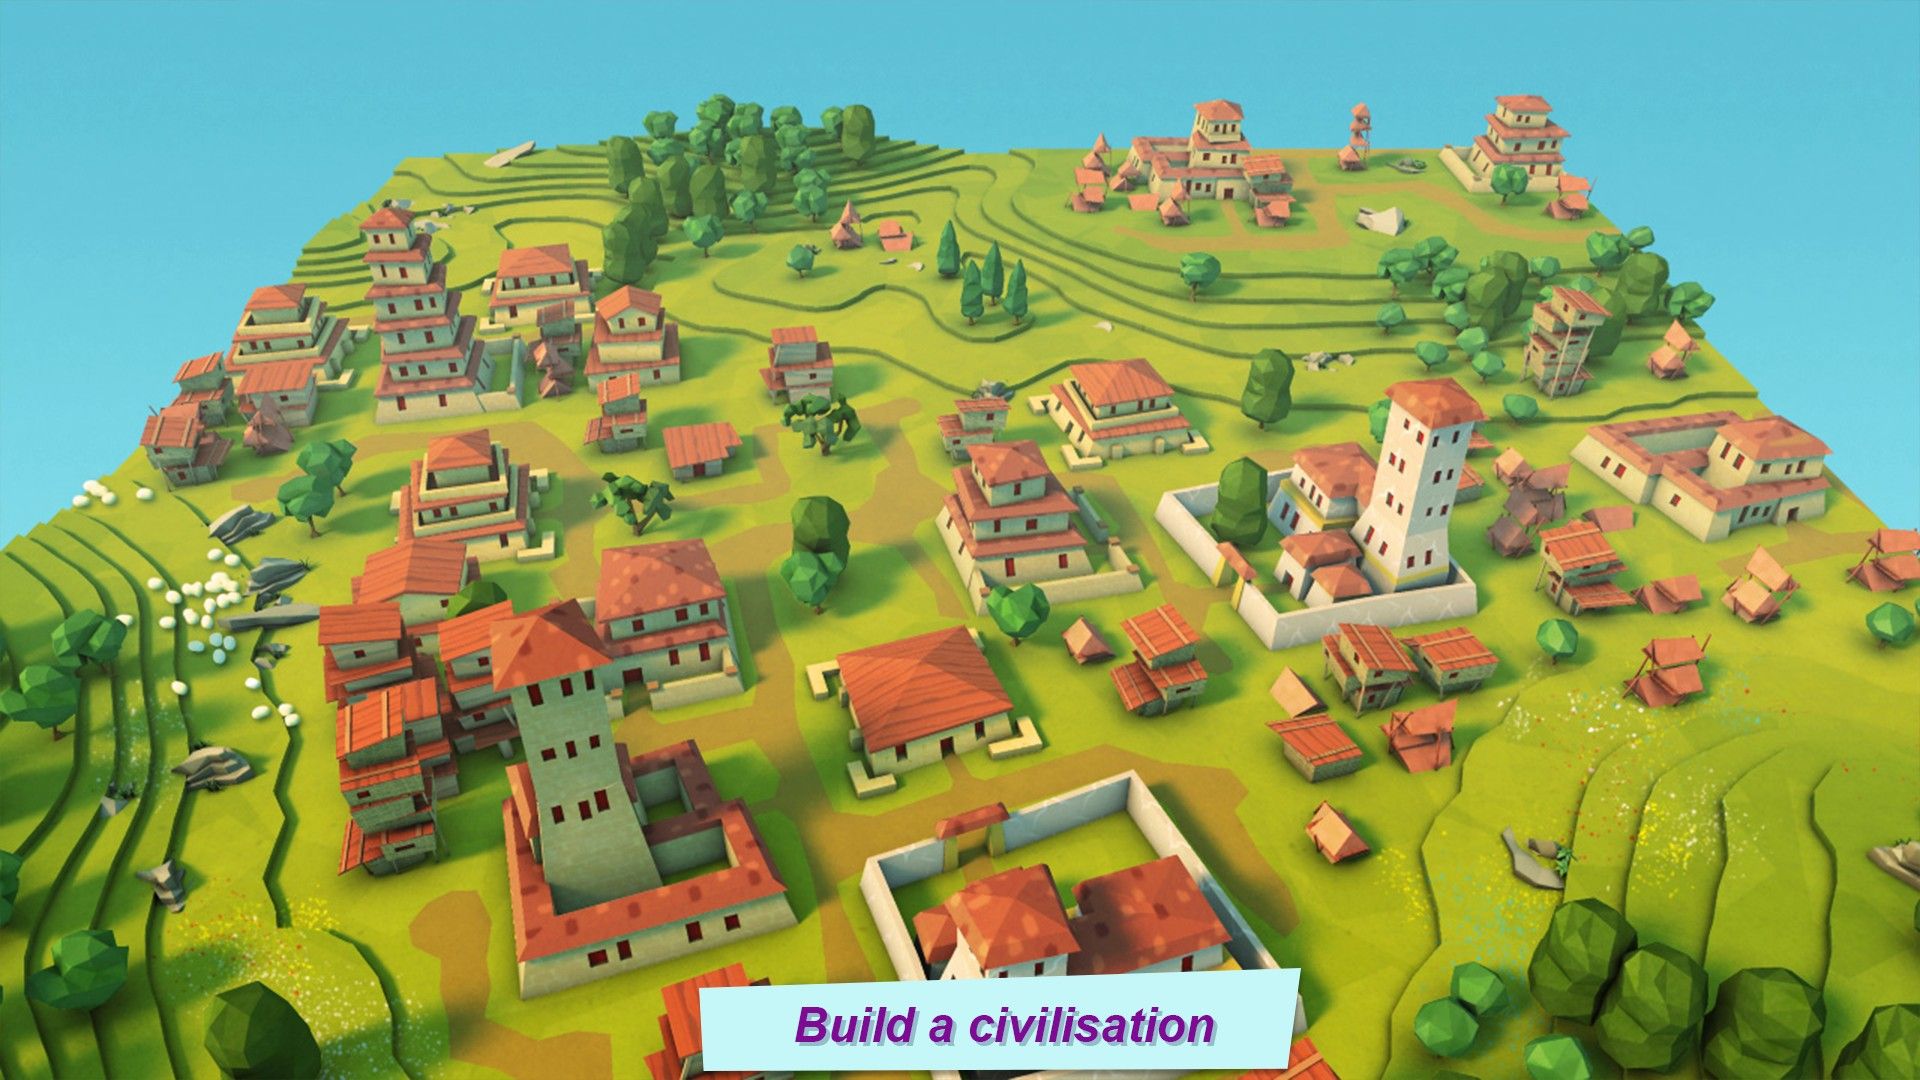 godus peter molyneux talks new game xbox one and where it all started image 5